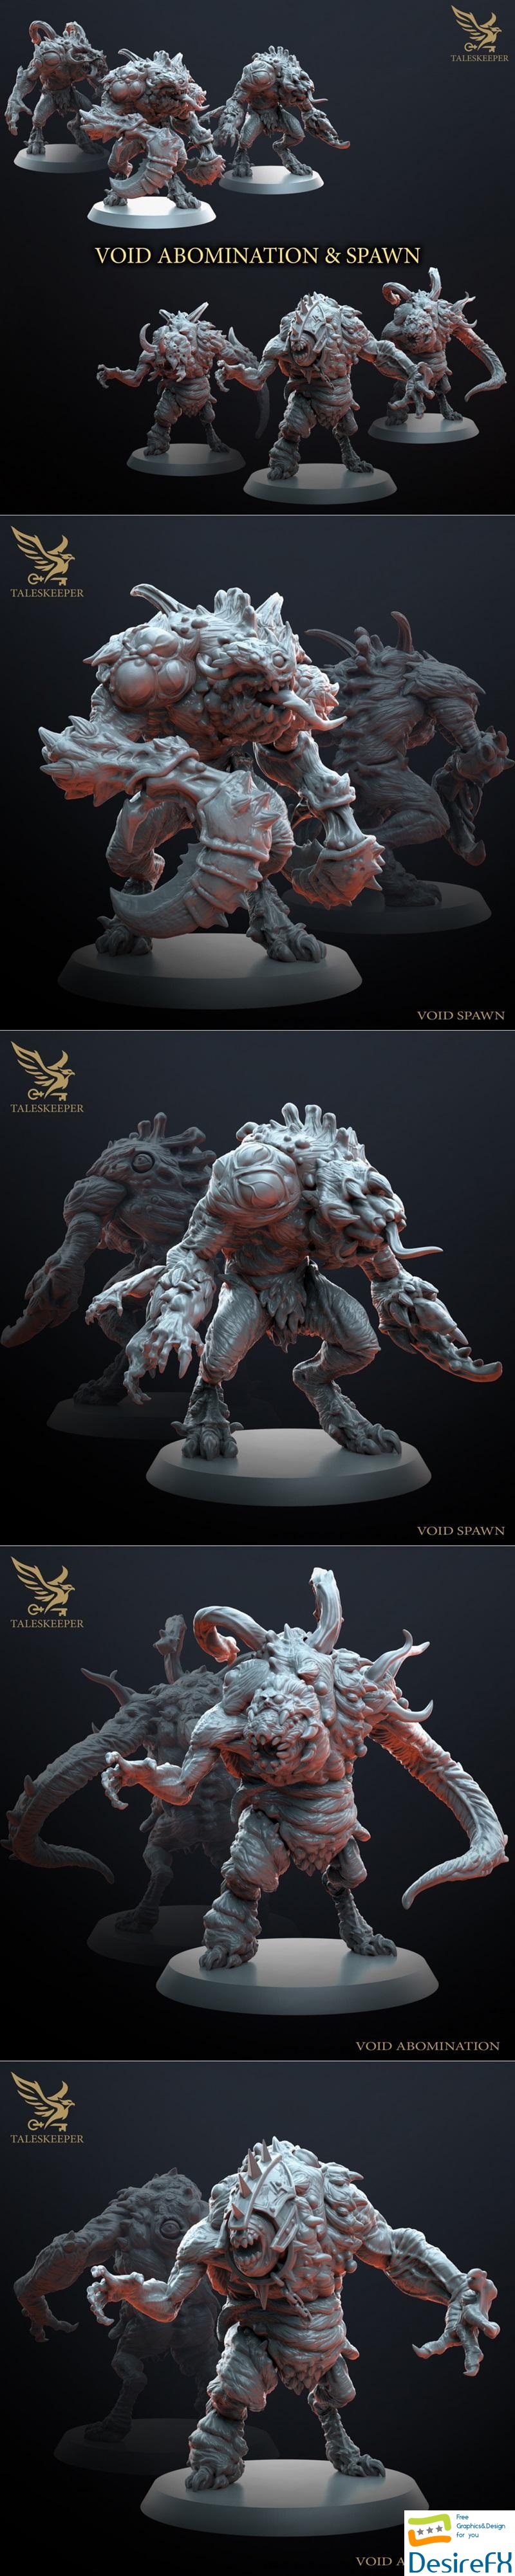 Tales Keeper - Void Abomination and Spawn 3D Print